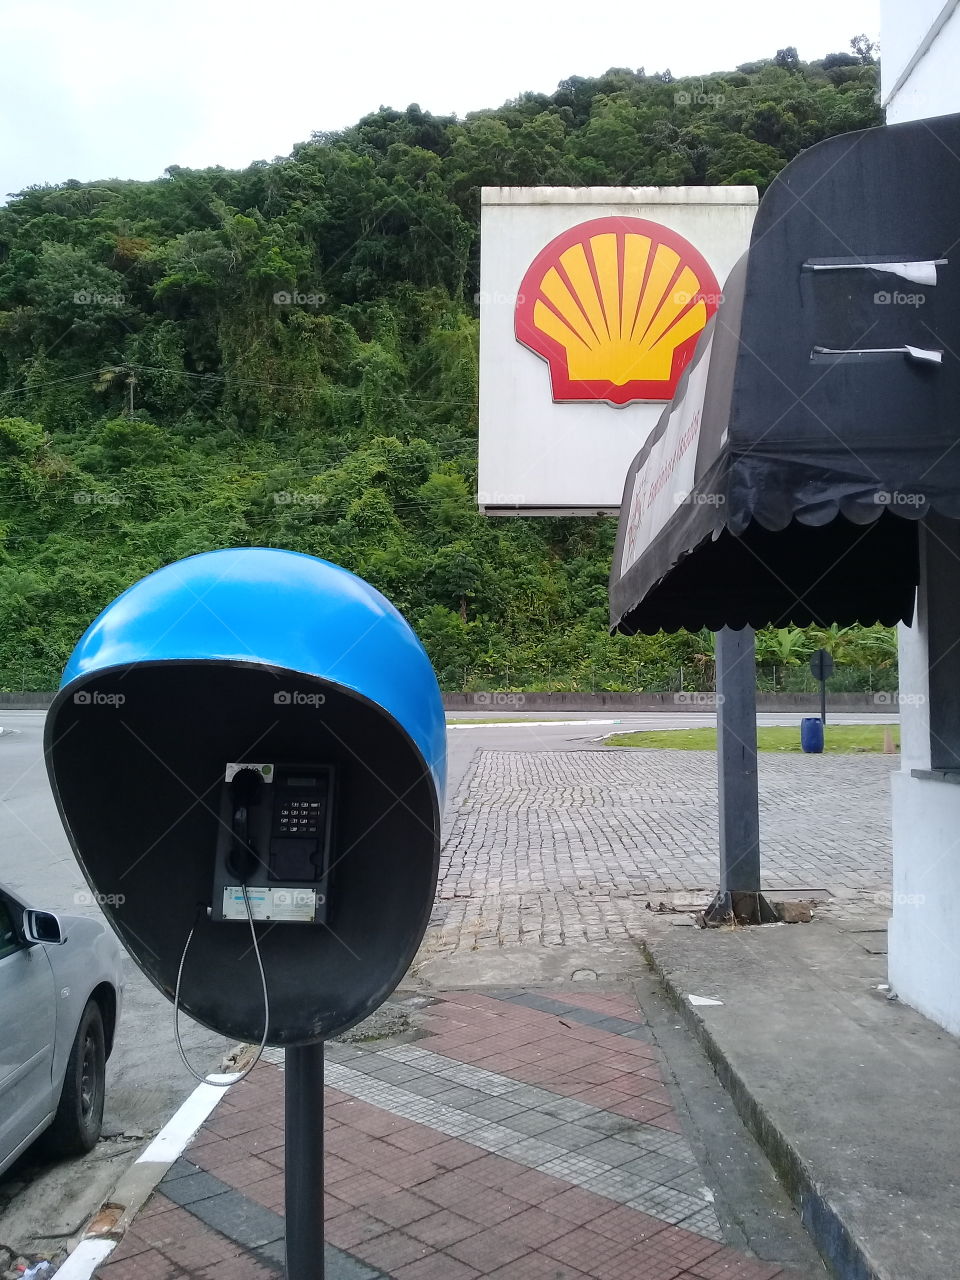 Shell and telefone